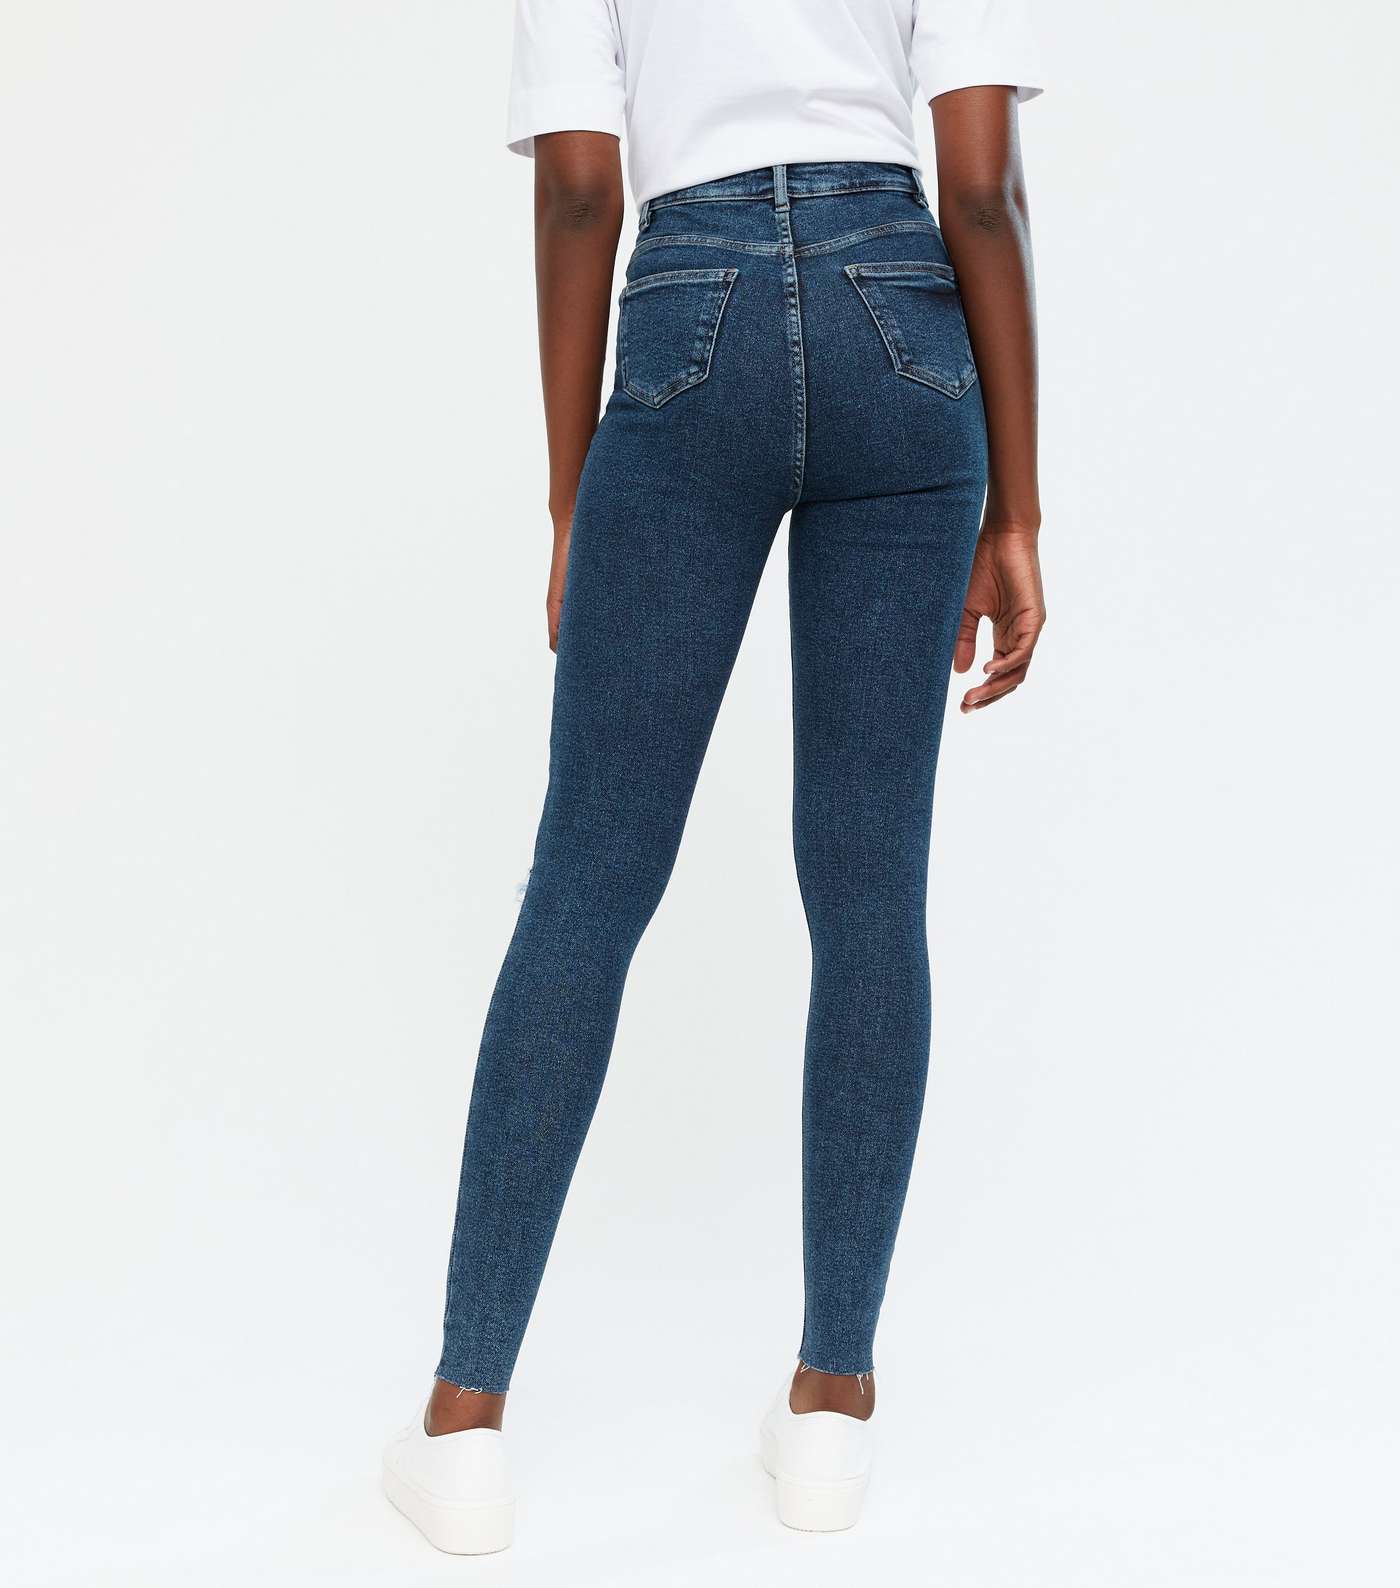 Tall Blue Rinse Wash Ripped High Waist Hallie Super Skinny Jeans Image 4